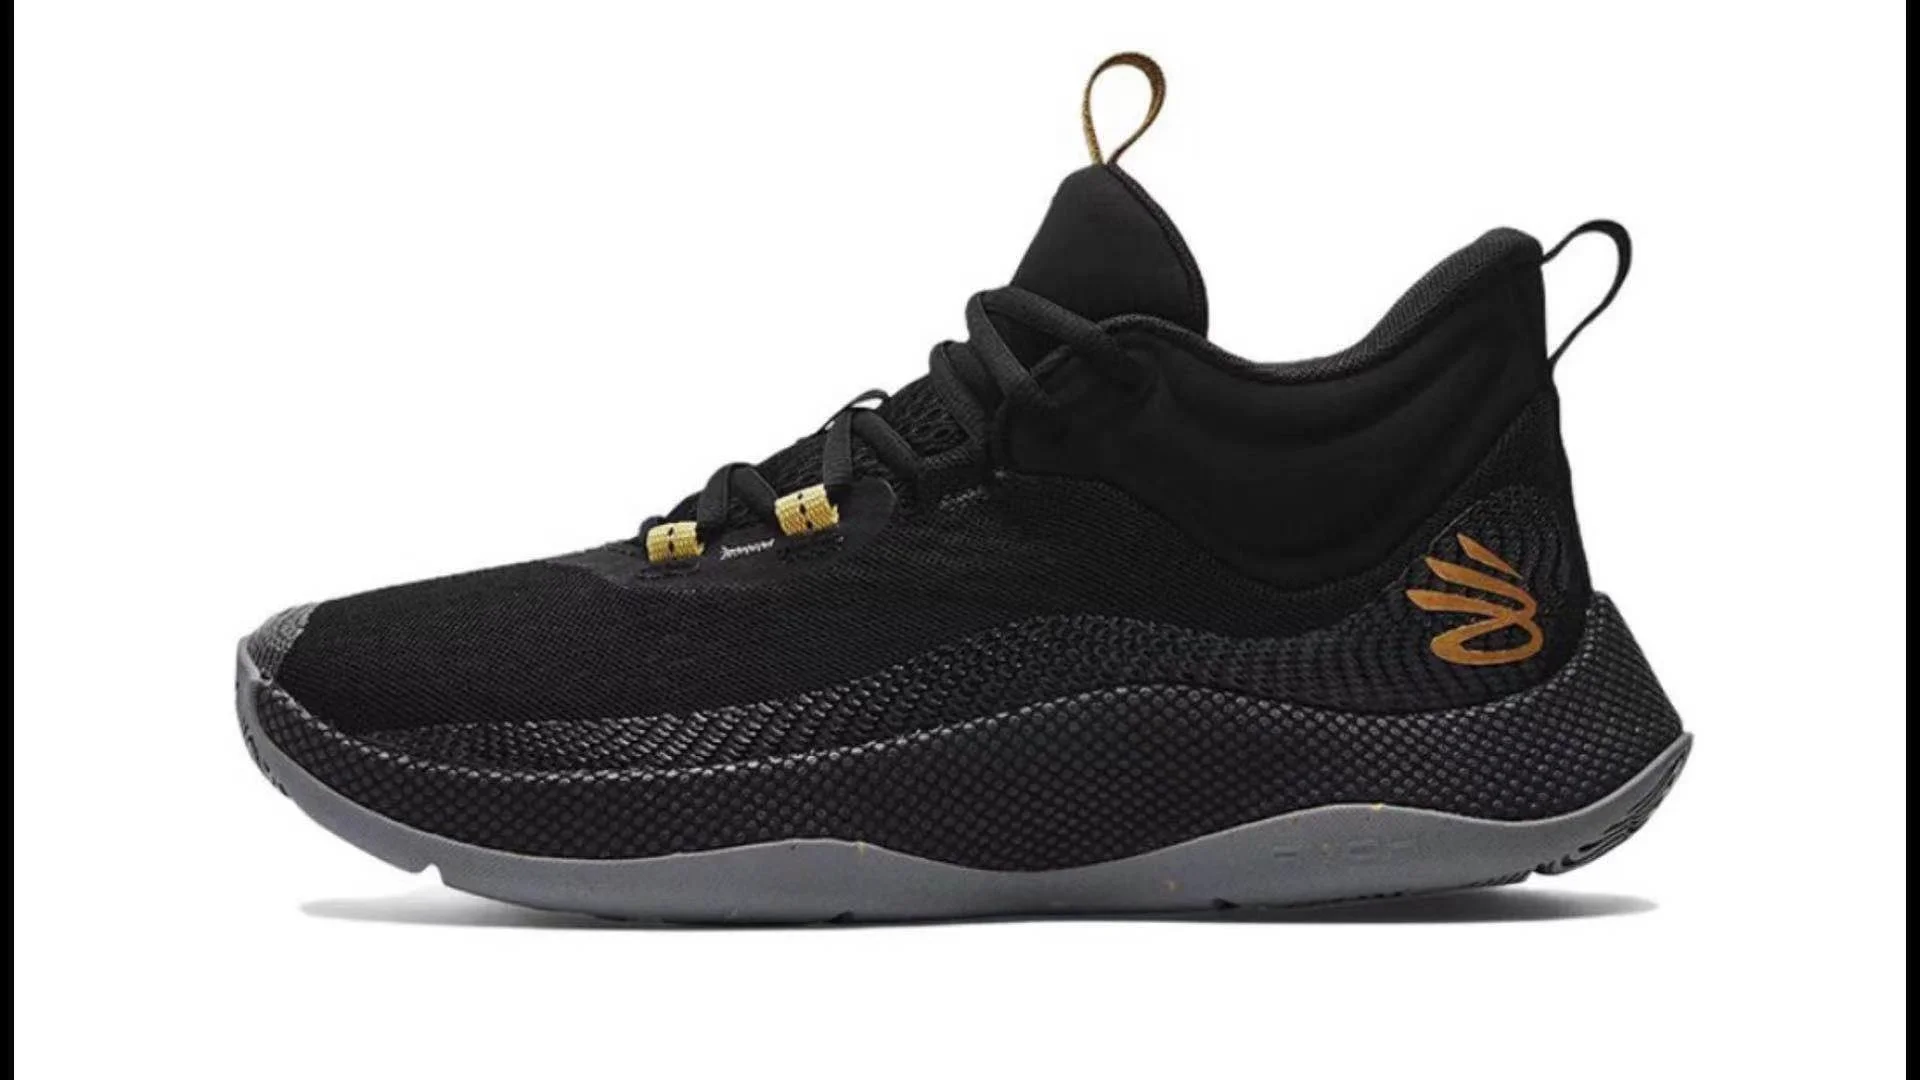 

New Arrival UNDER ARMOUR Curry 8 Men Basketball Shoes UA Mid Gym Training Athletic Gold Basketball Sneakers for Men Size40-46